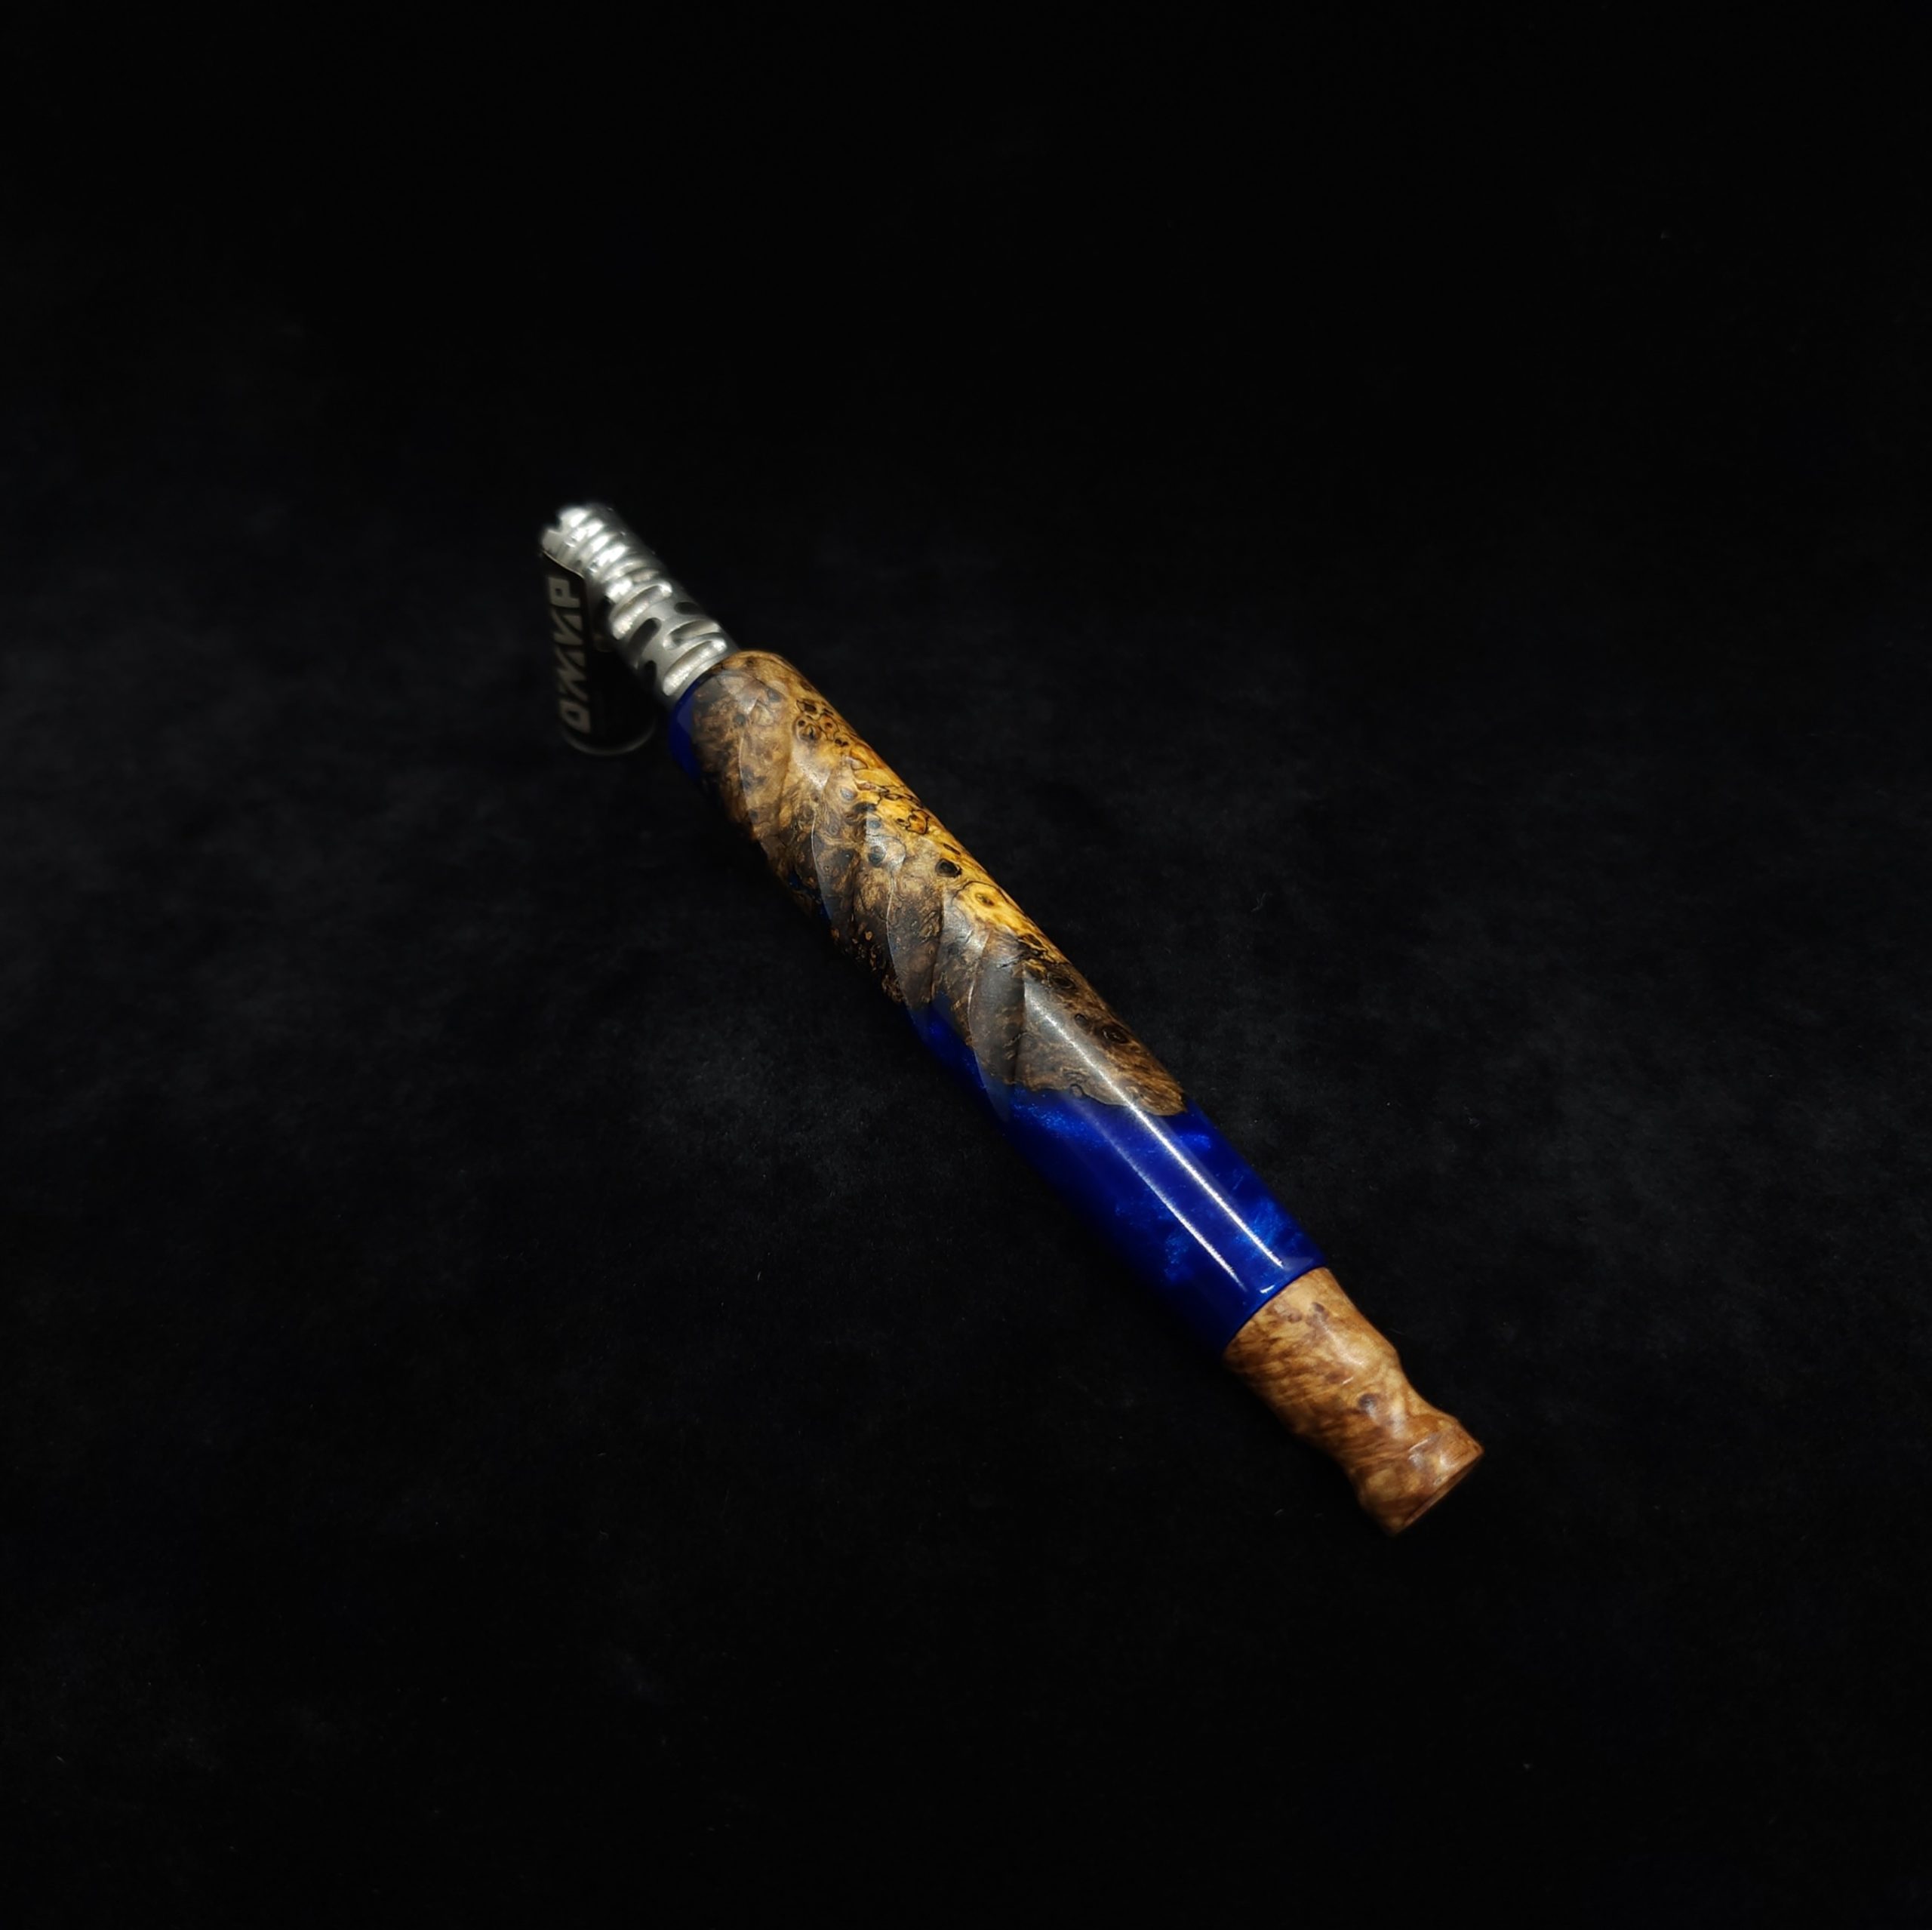 This image portrays Cosmic Burl Hybrid-Eclipse XL Dynavap Stem+Burl Wood Mouthpiece by Dovetail Woodwork.